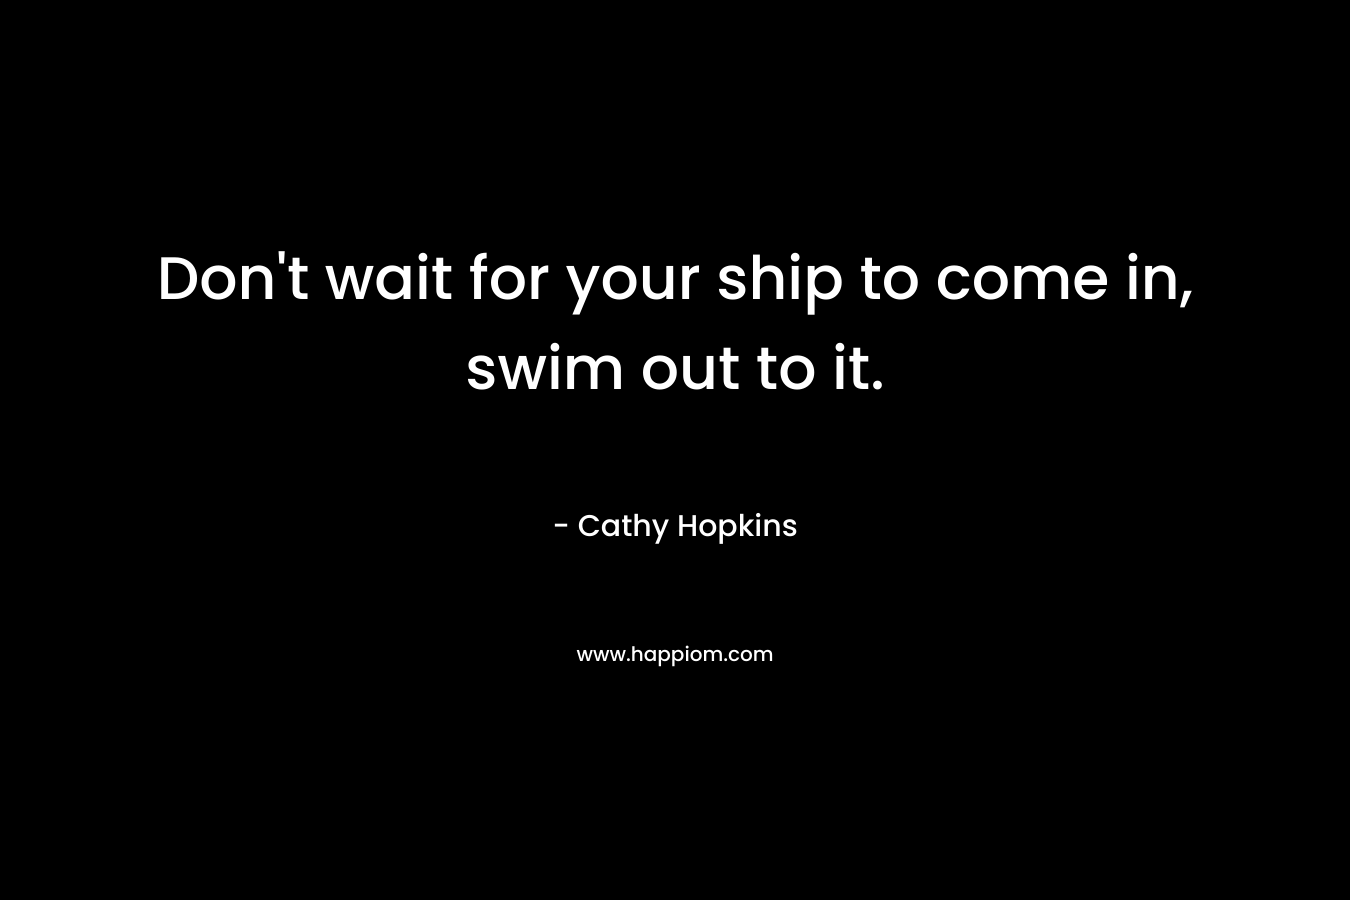 Don’t wait for your ship to come in, swim out to it. – Cathy Hopkins